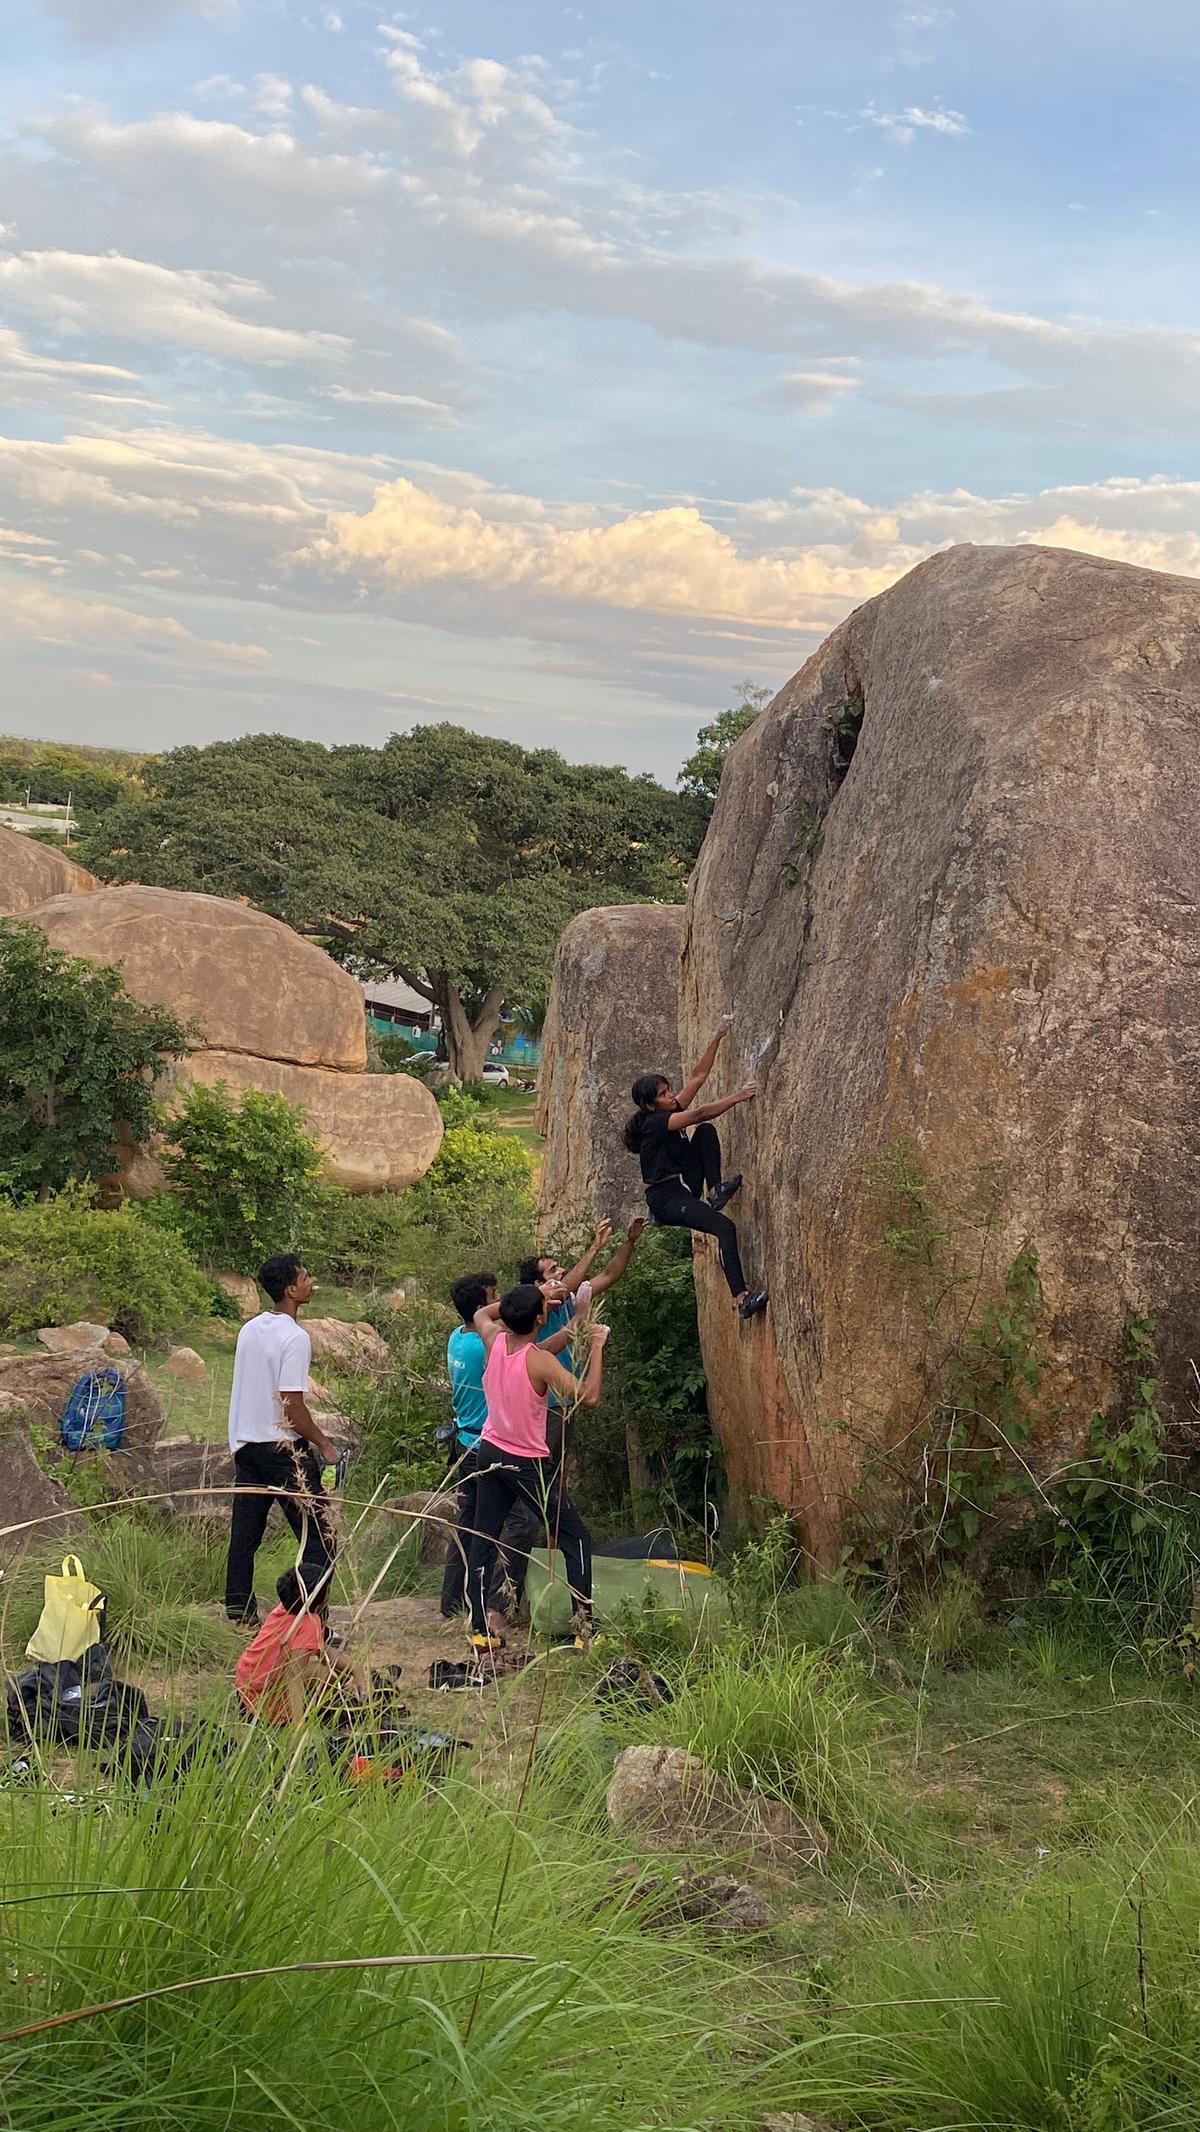 Climbers attempting bouldering outdoors